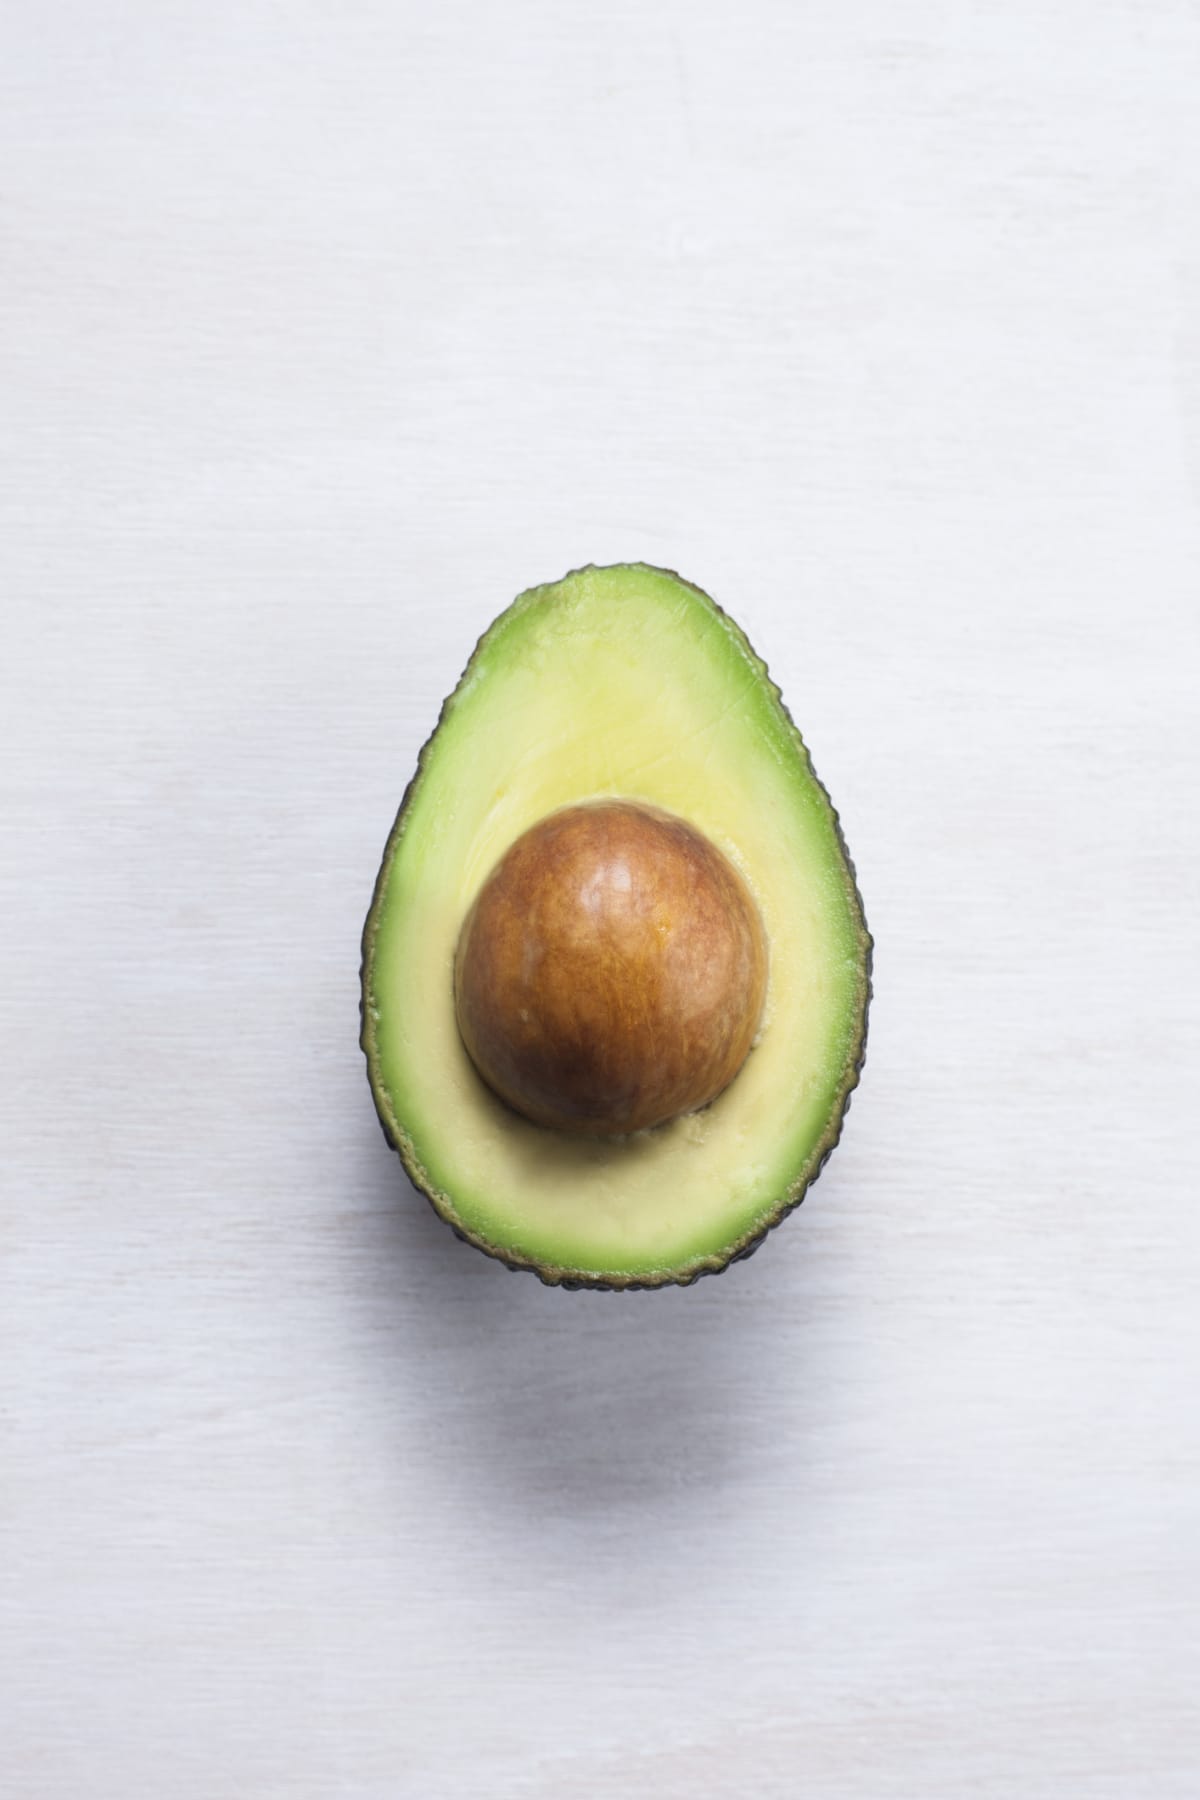 An avocado cut in half. Avocado is the fruit of the avocado tree (Persea americana). The stone is the seed.